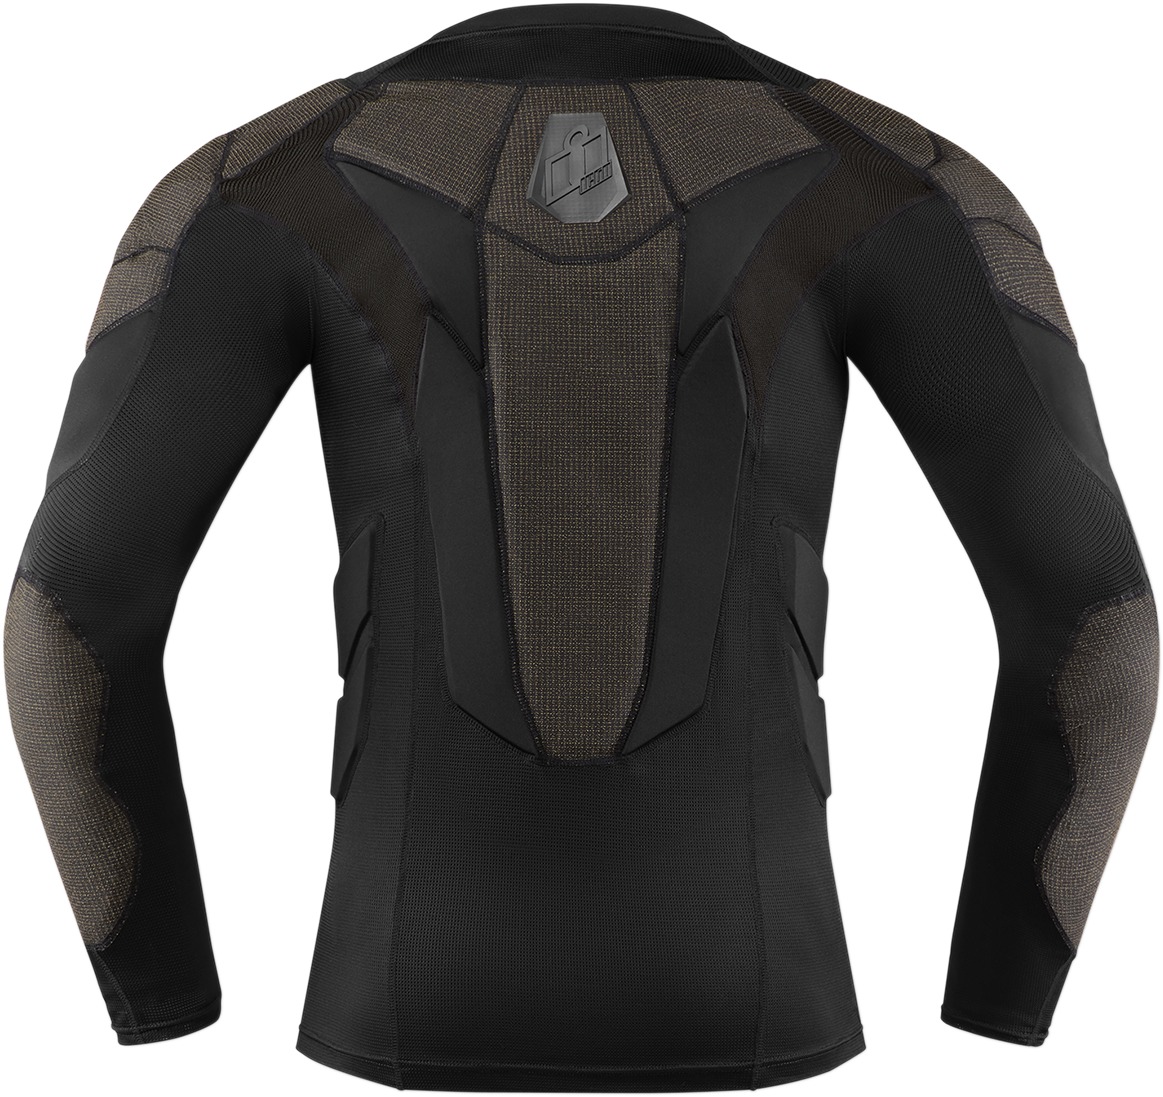 Long-Sleeve Compression Armor Shirt Black X-Large - Click Image to Close